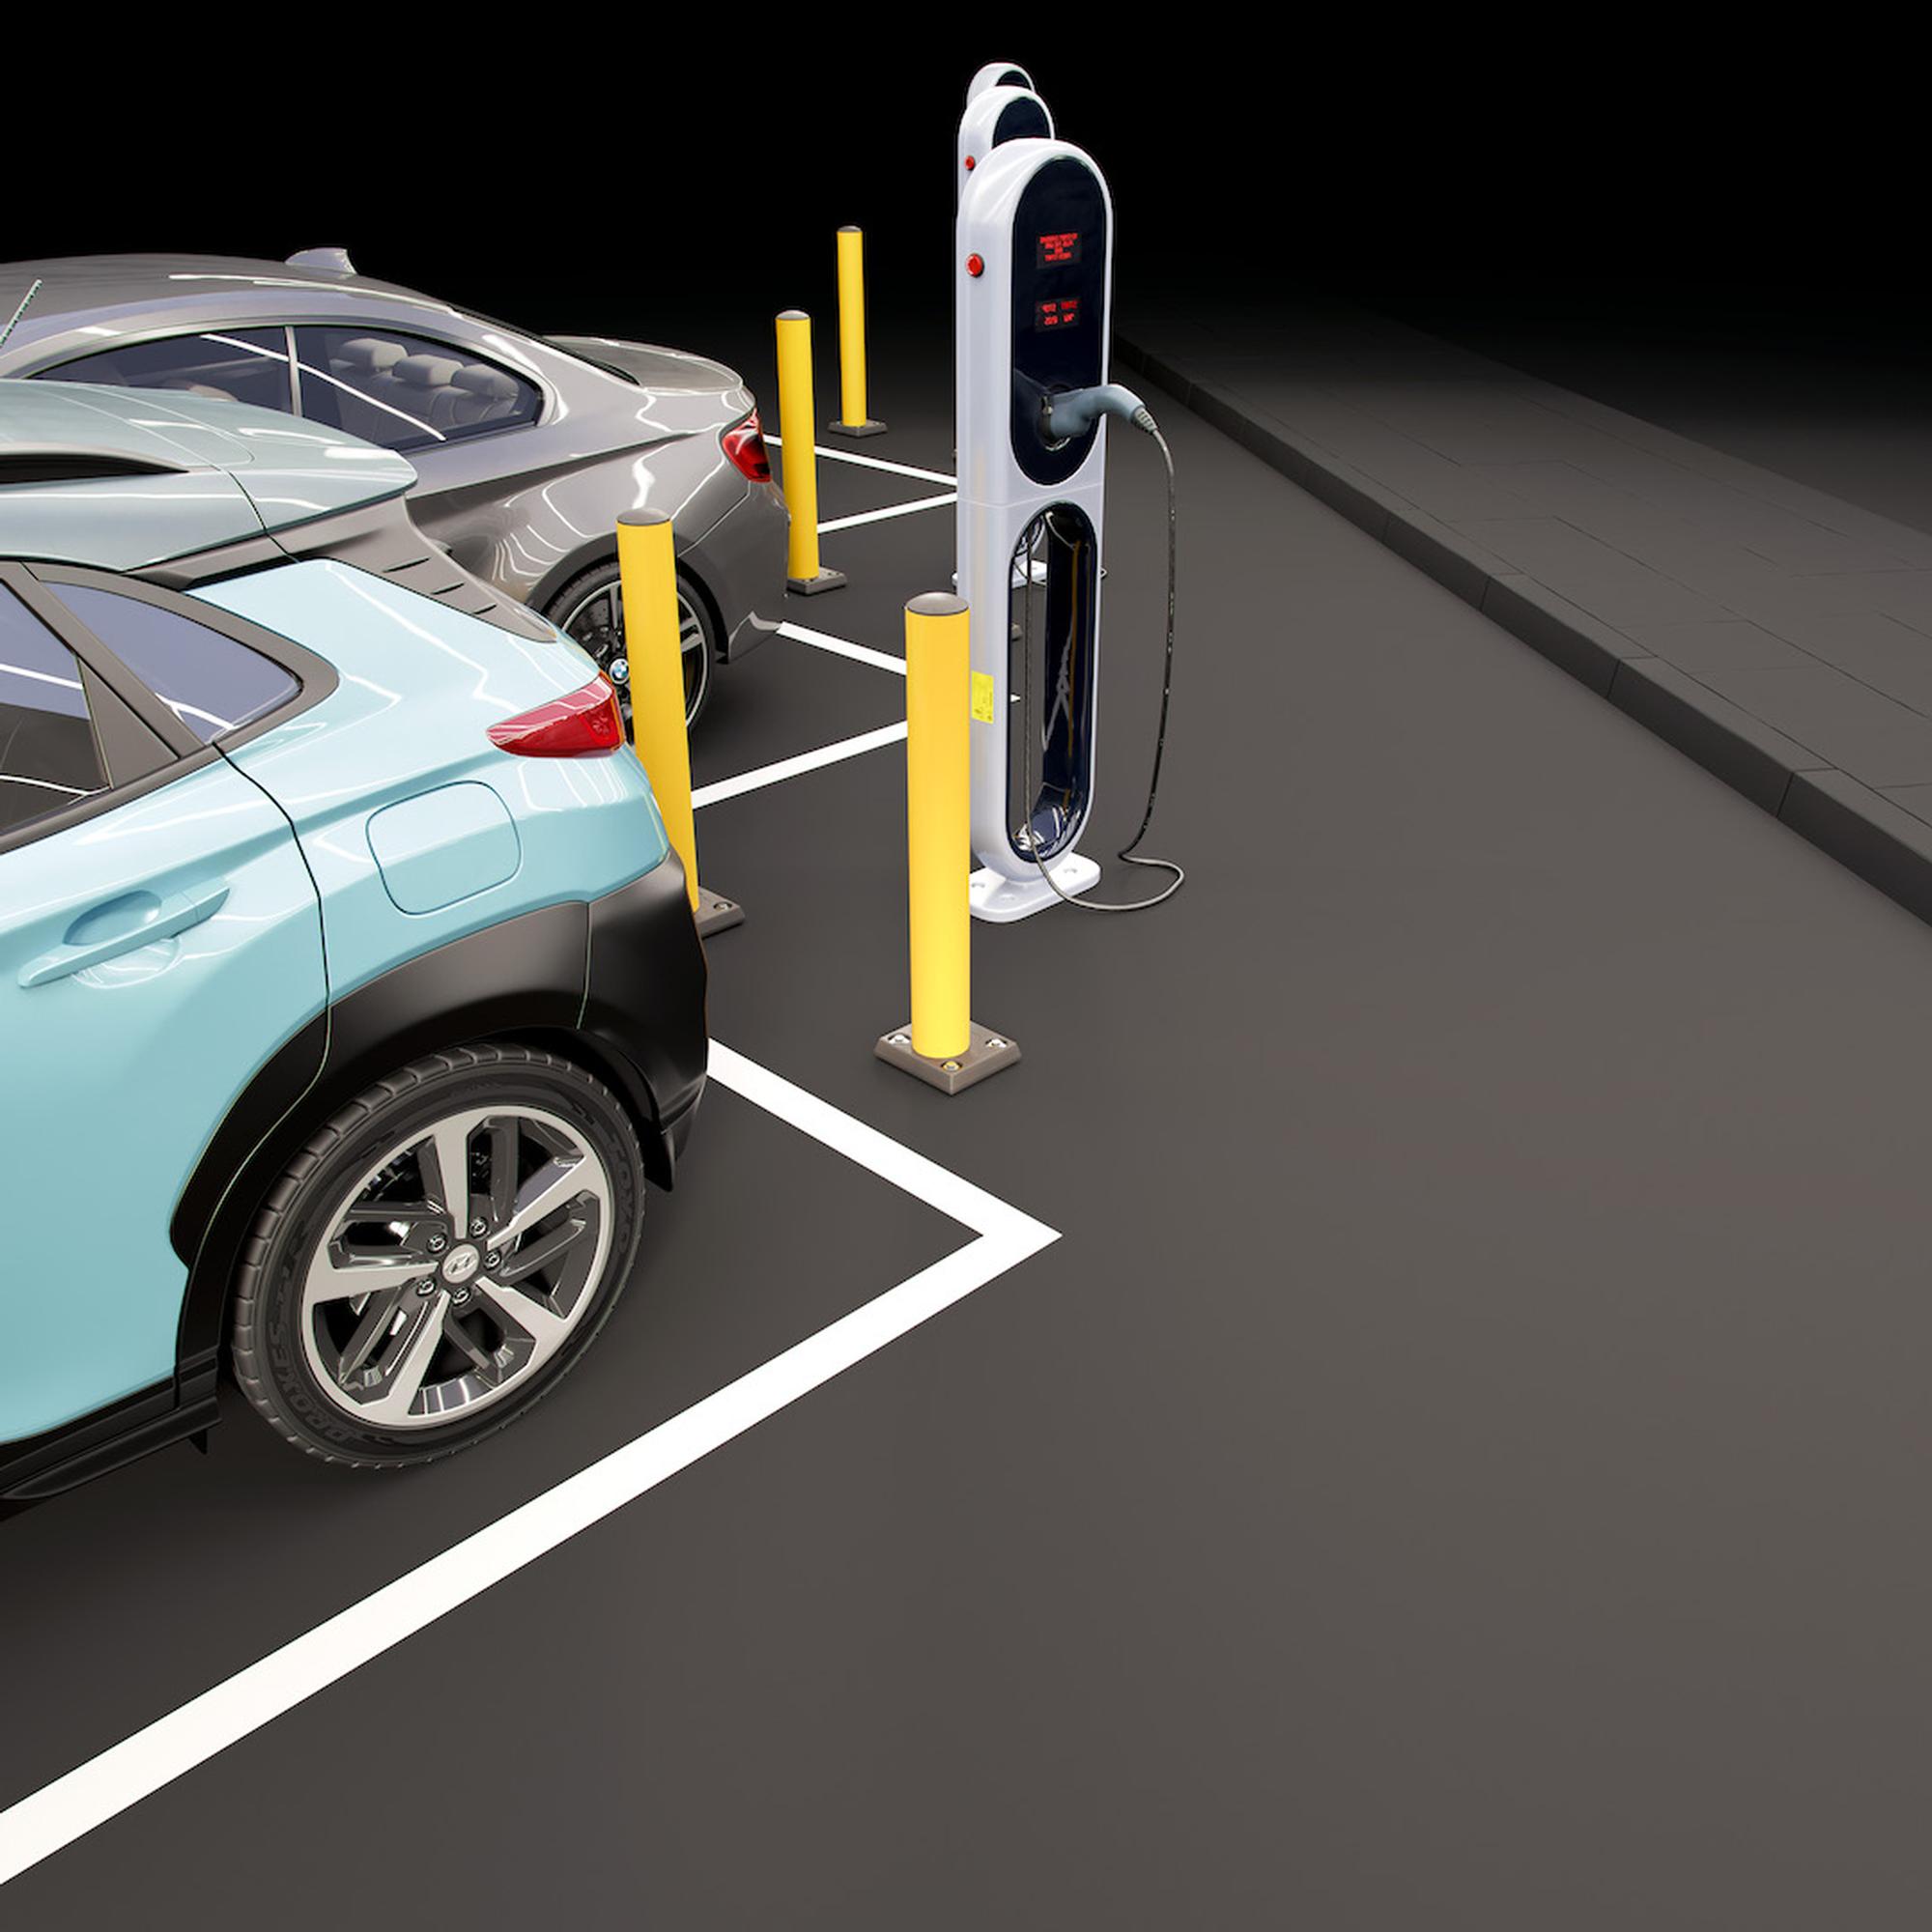 Keeping chargepoints safe and sound